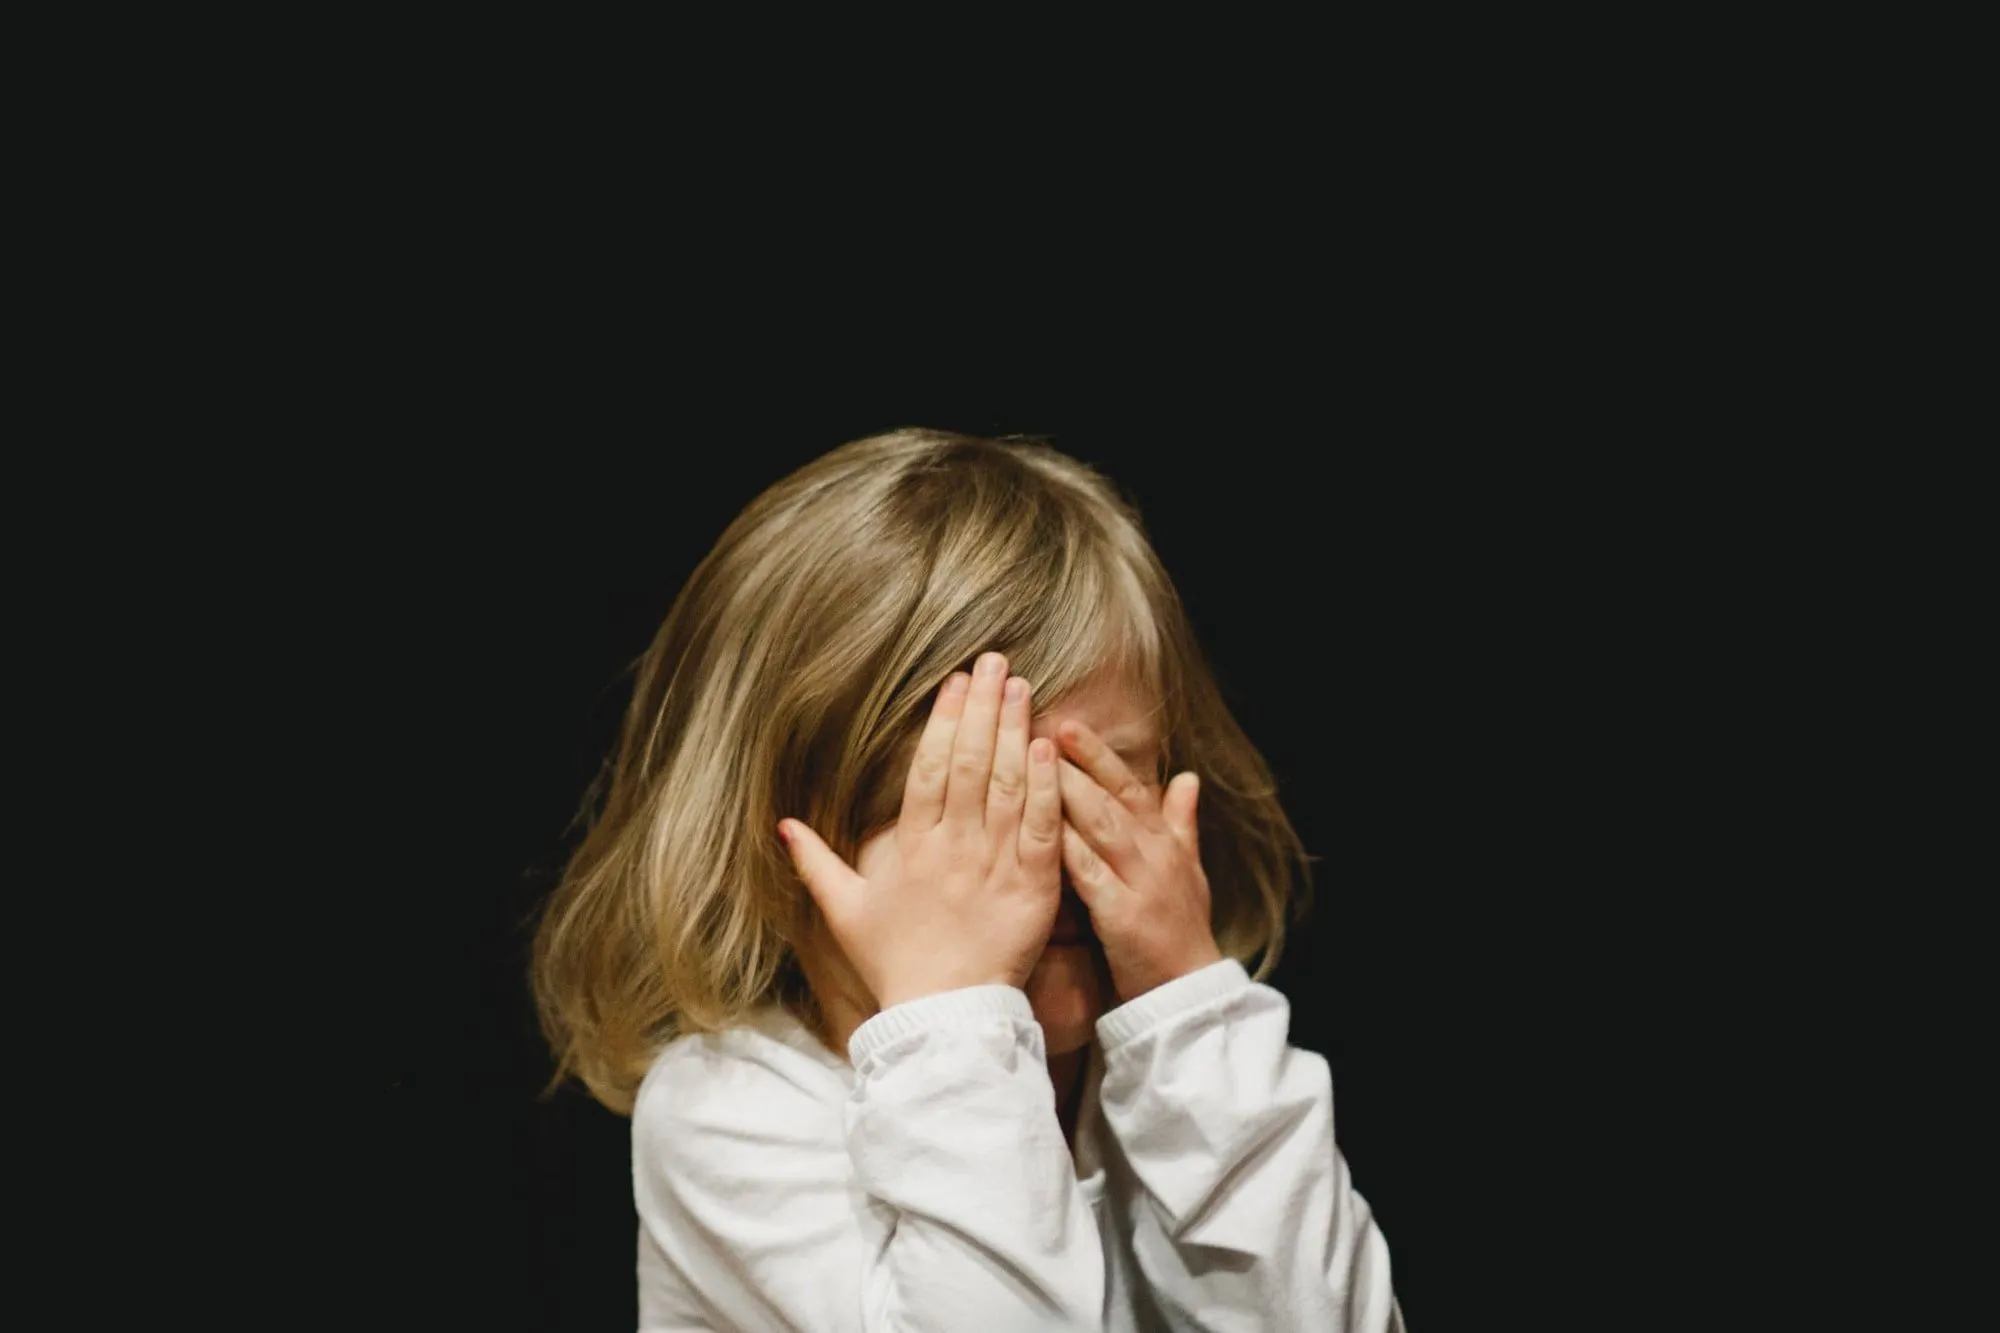 A child hiding behind her hands, nervous to speak in front of a group.